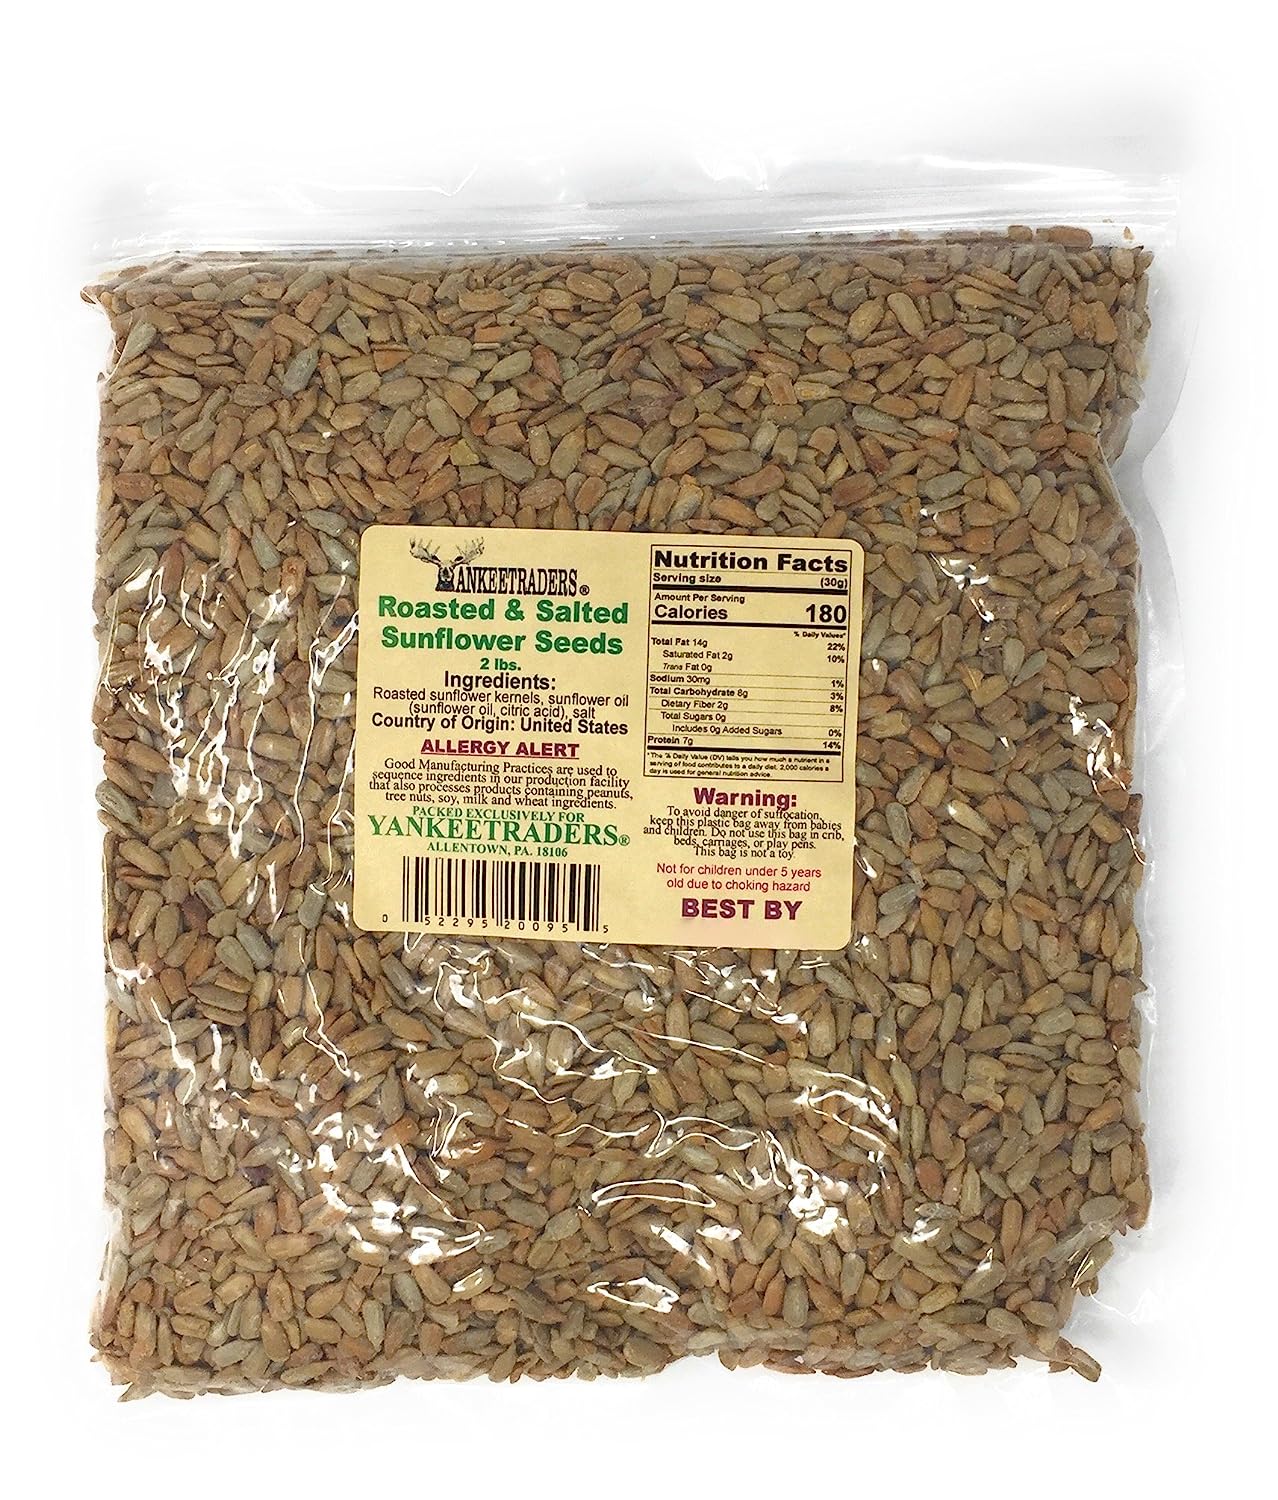 Yankee Traders Brand Sunflower Seeds, Salted and Roasted